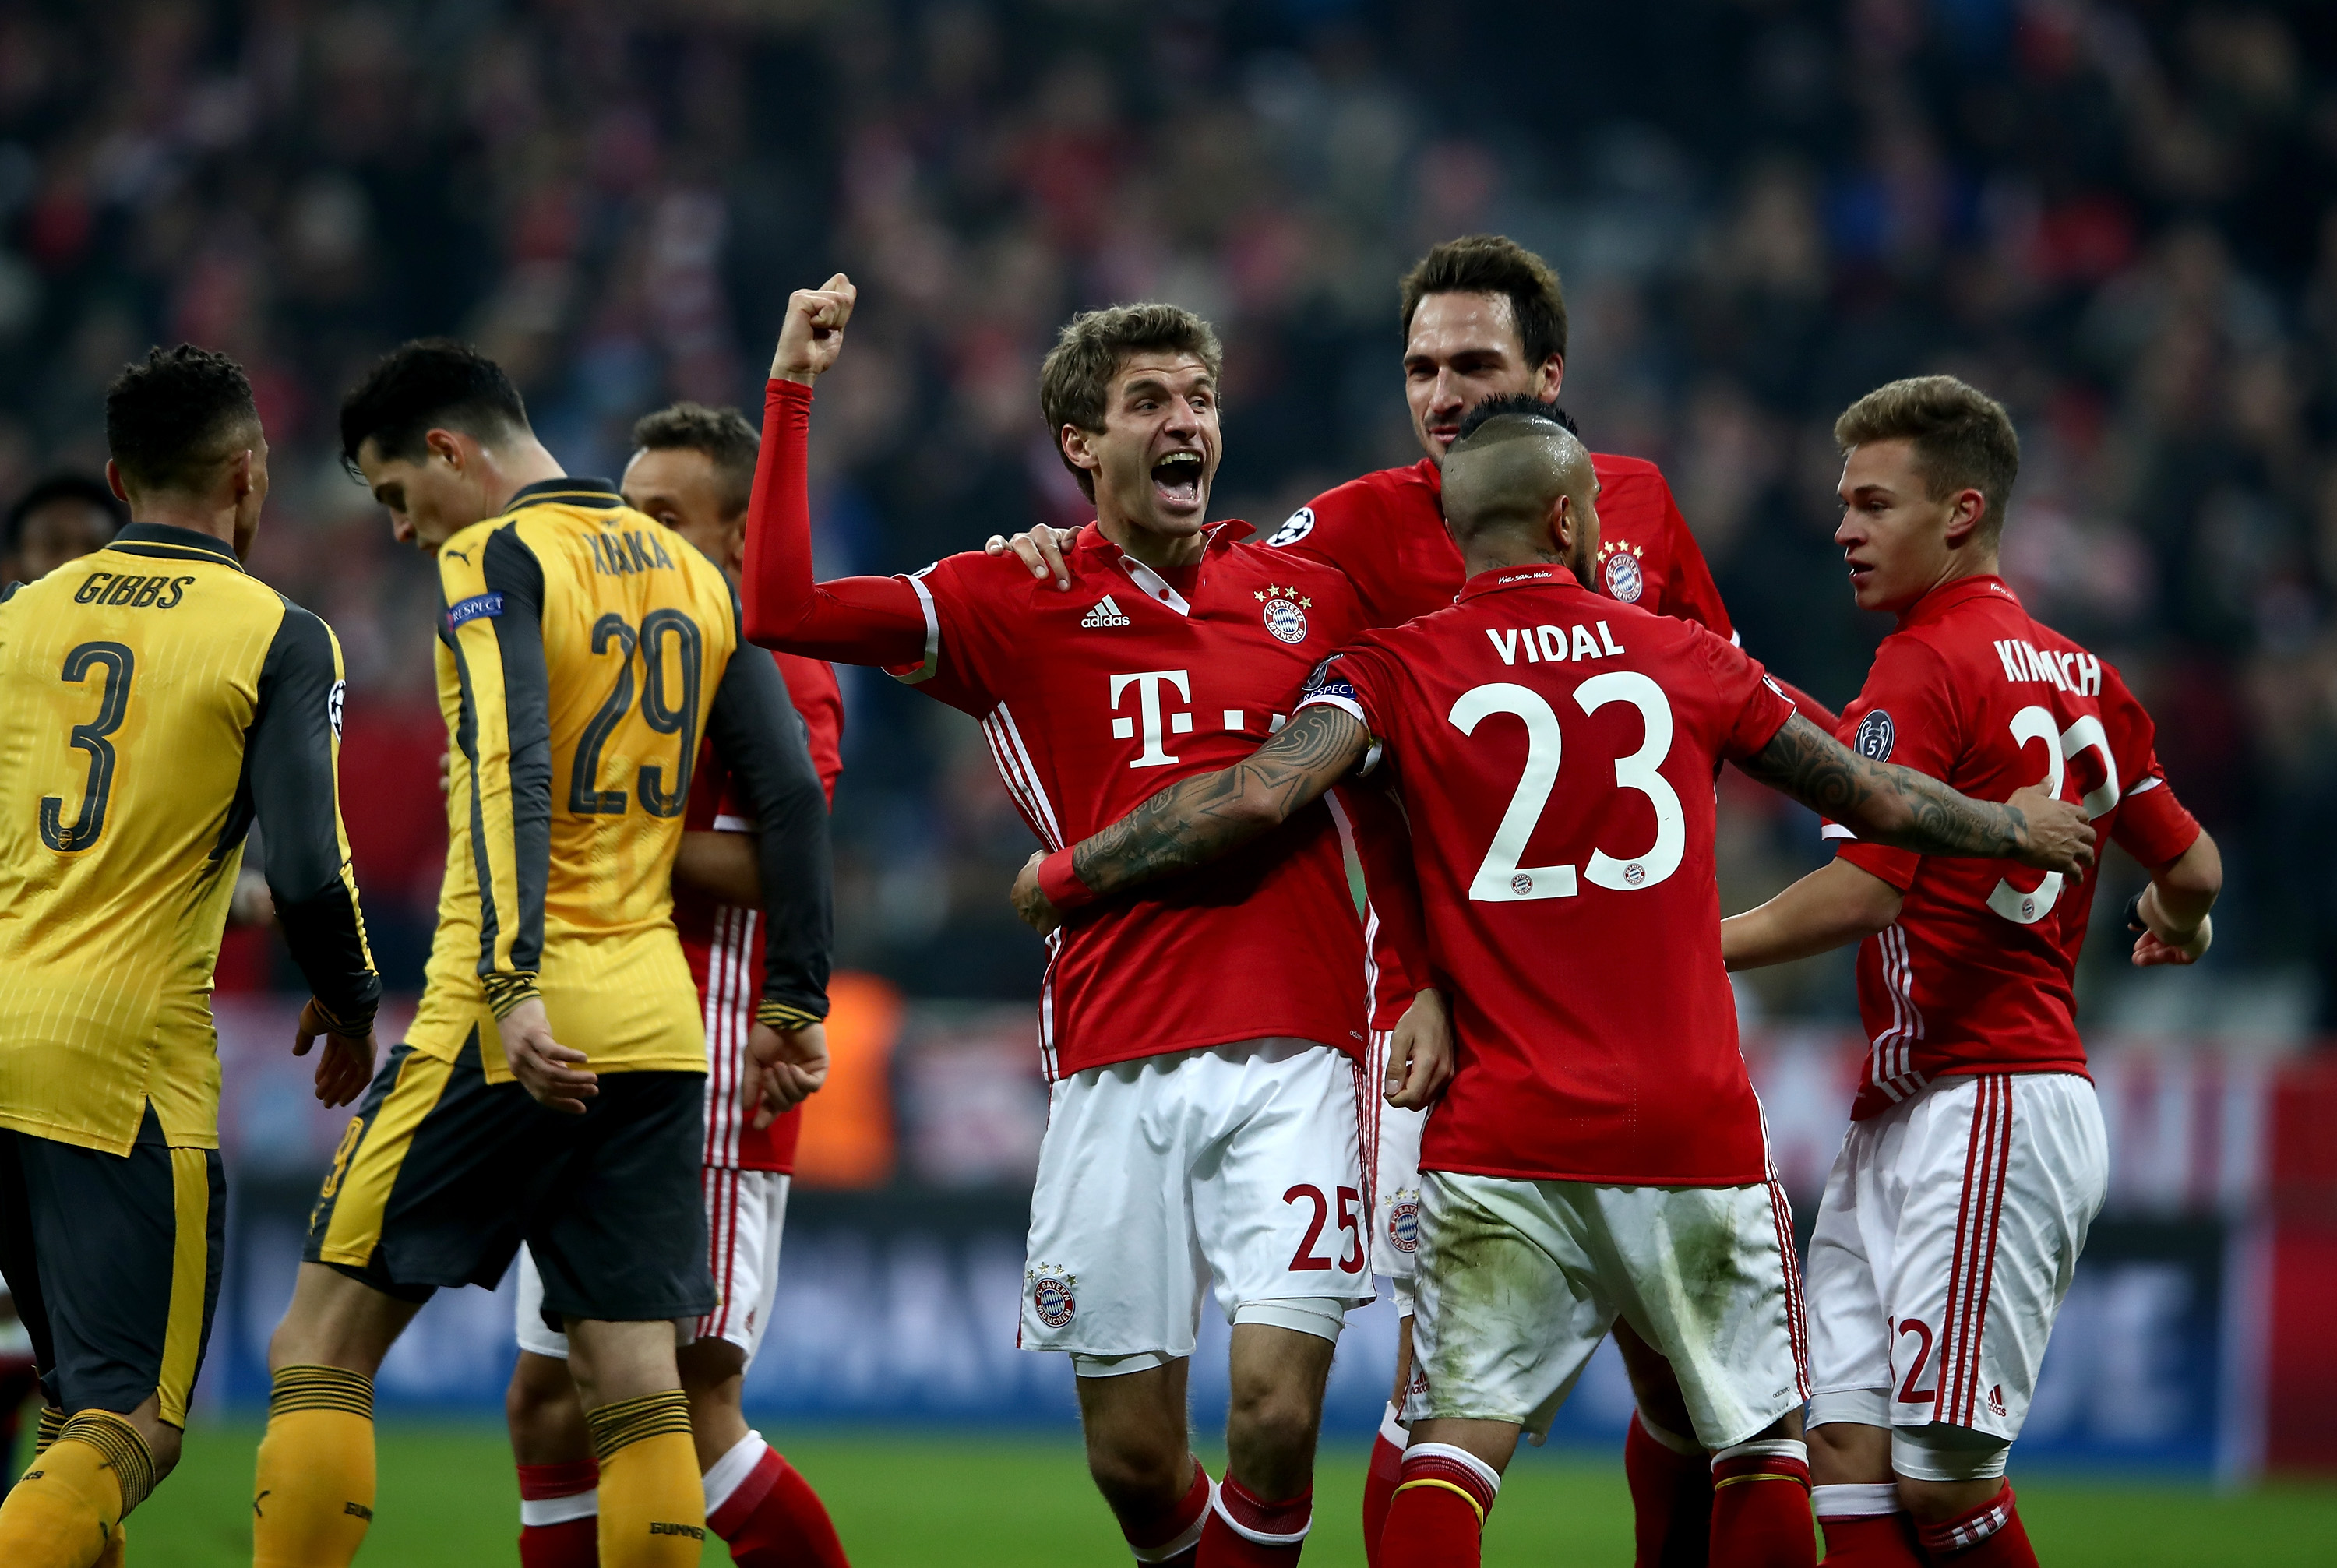 MUNICH, GERMANY - FEBRUARY 15: Thomas Mueller #25 of Muenchen celebrate with his team mates after he scores the 5th goal during the UEFA Champions League Round of 16 first leg match between FC Bayern Muenchen and Arsenal FC at Allianz Arena on February 15, 2017 in Munich, Germany.  (Photo by Alex Grimm/Bongarts/Getty Images)